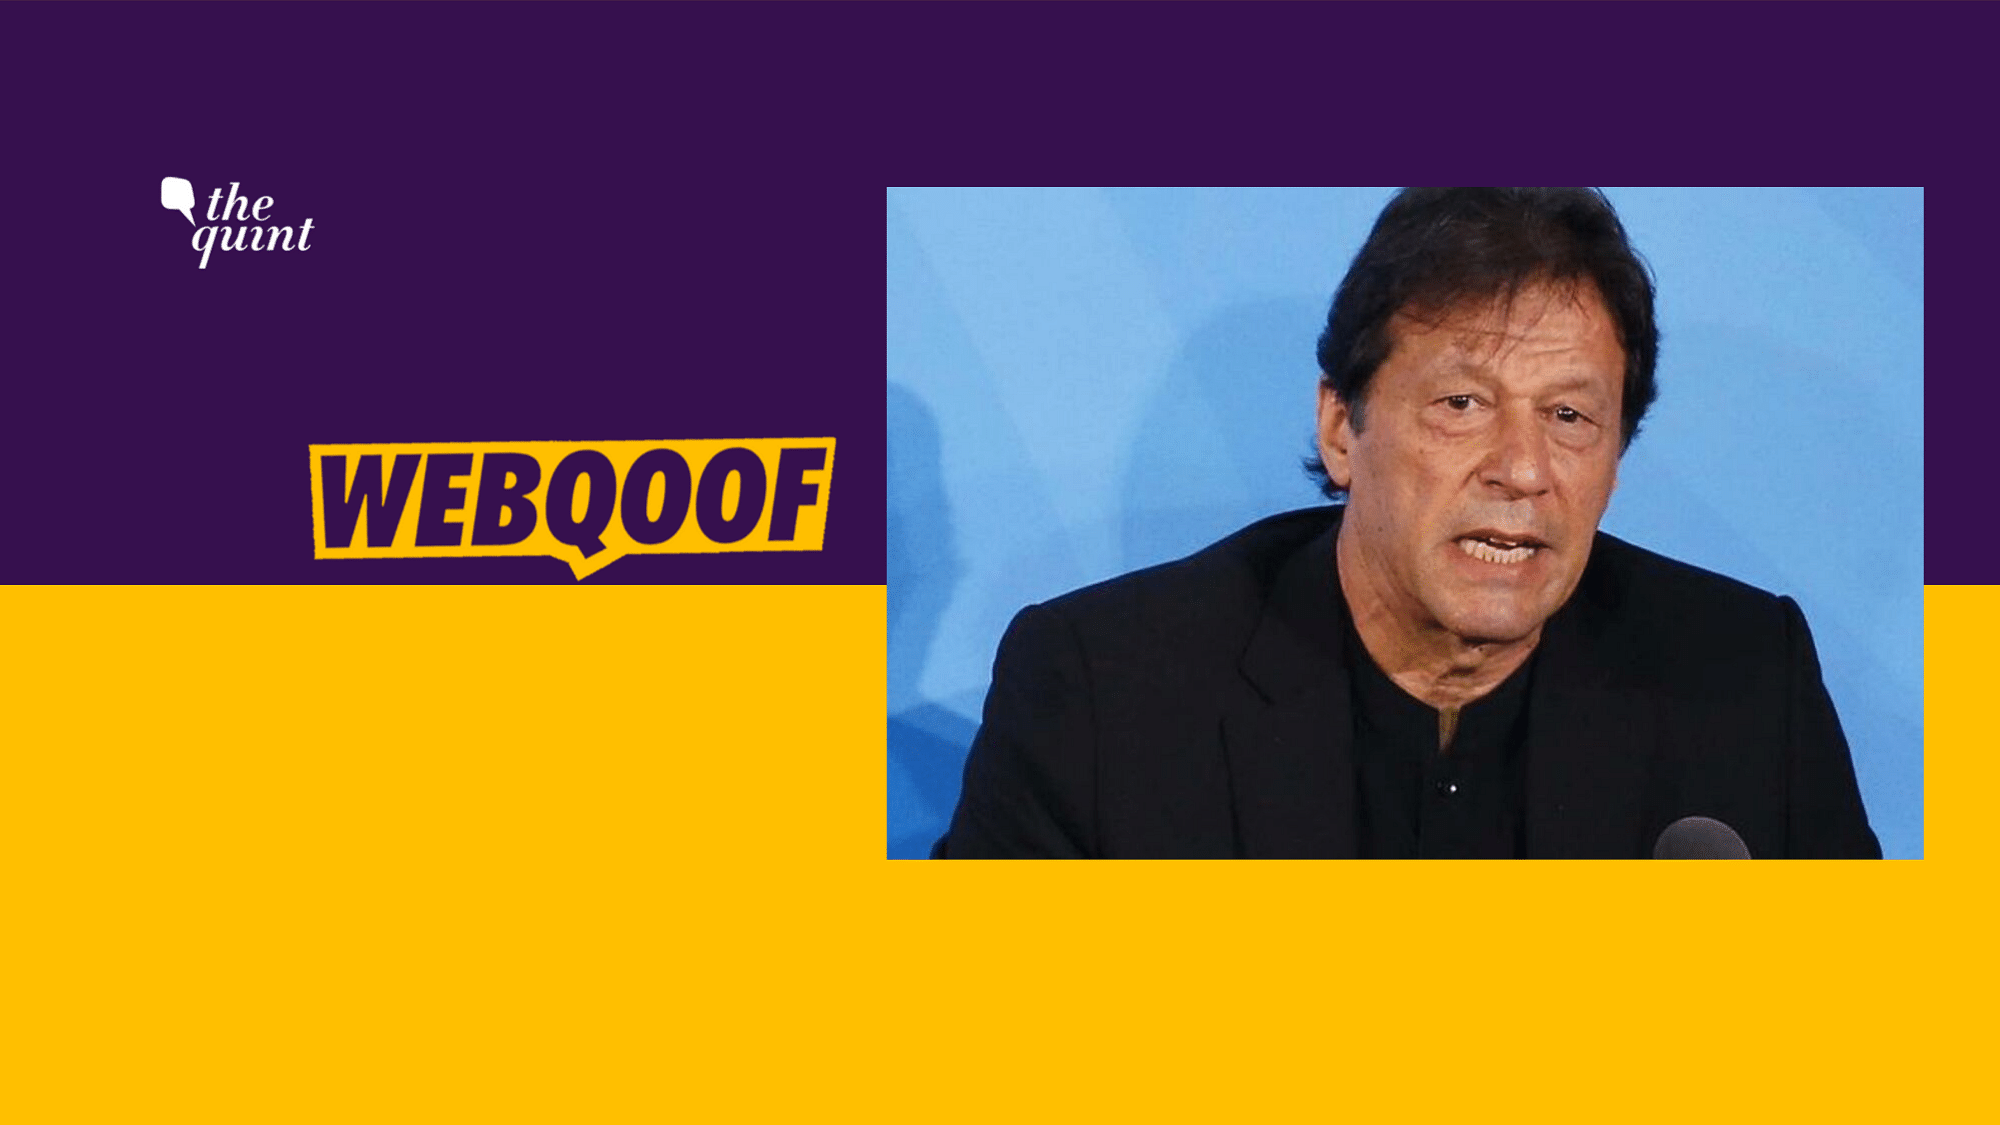 Imran Khan claimed that in the 1980s, former US President Ronald Reagan compared the Afghan mujahideen fighting against Soviet forces to the Founding Fathers of the United States.